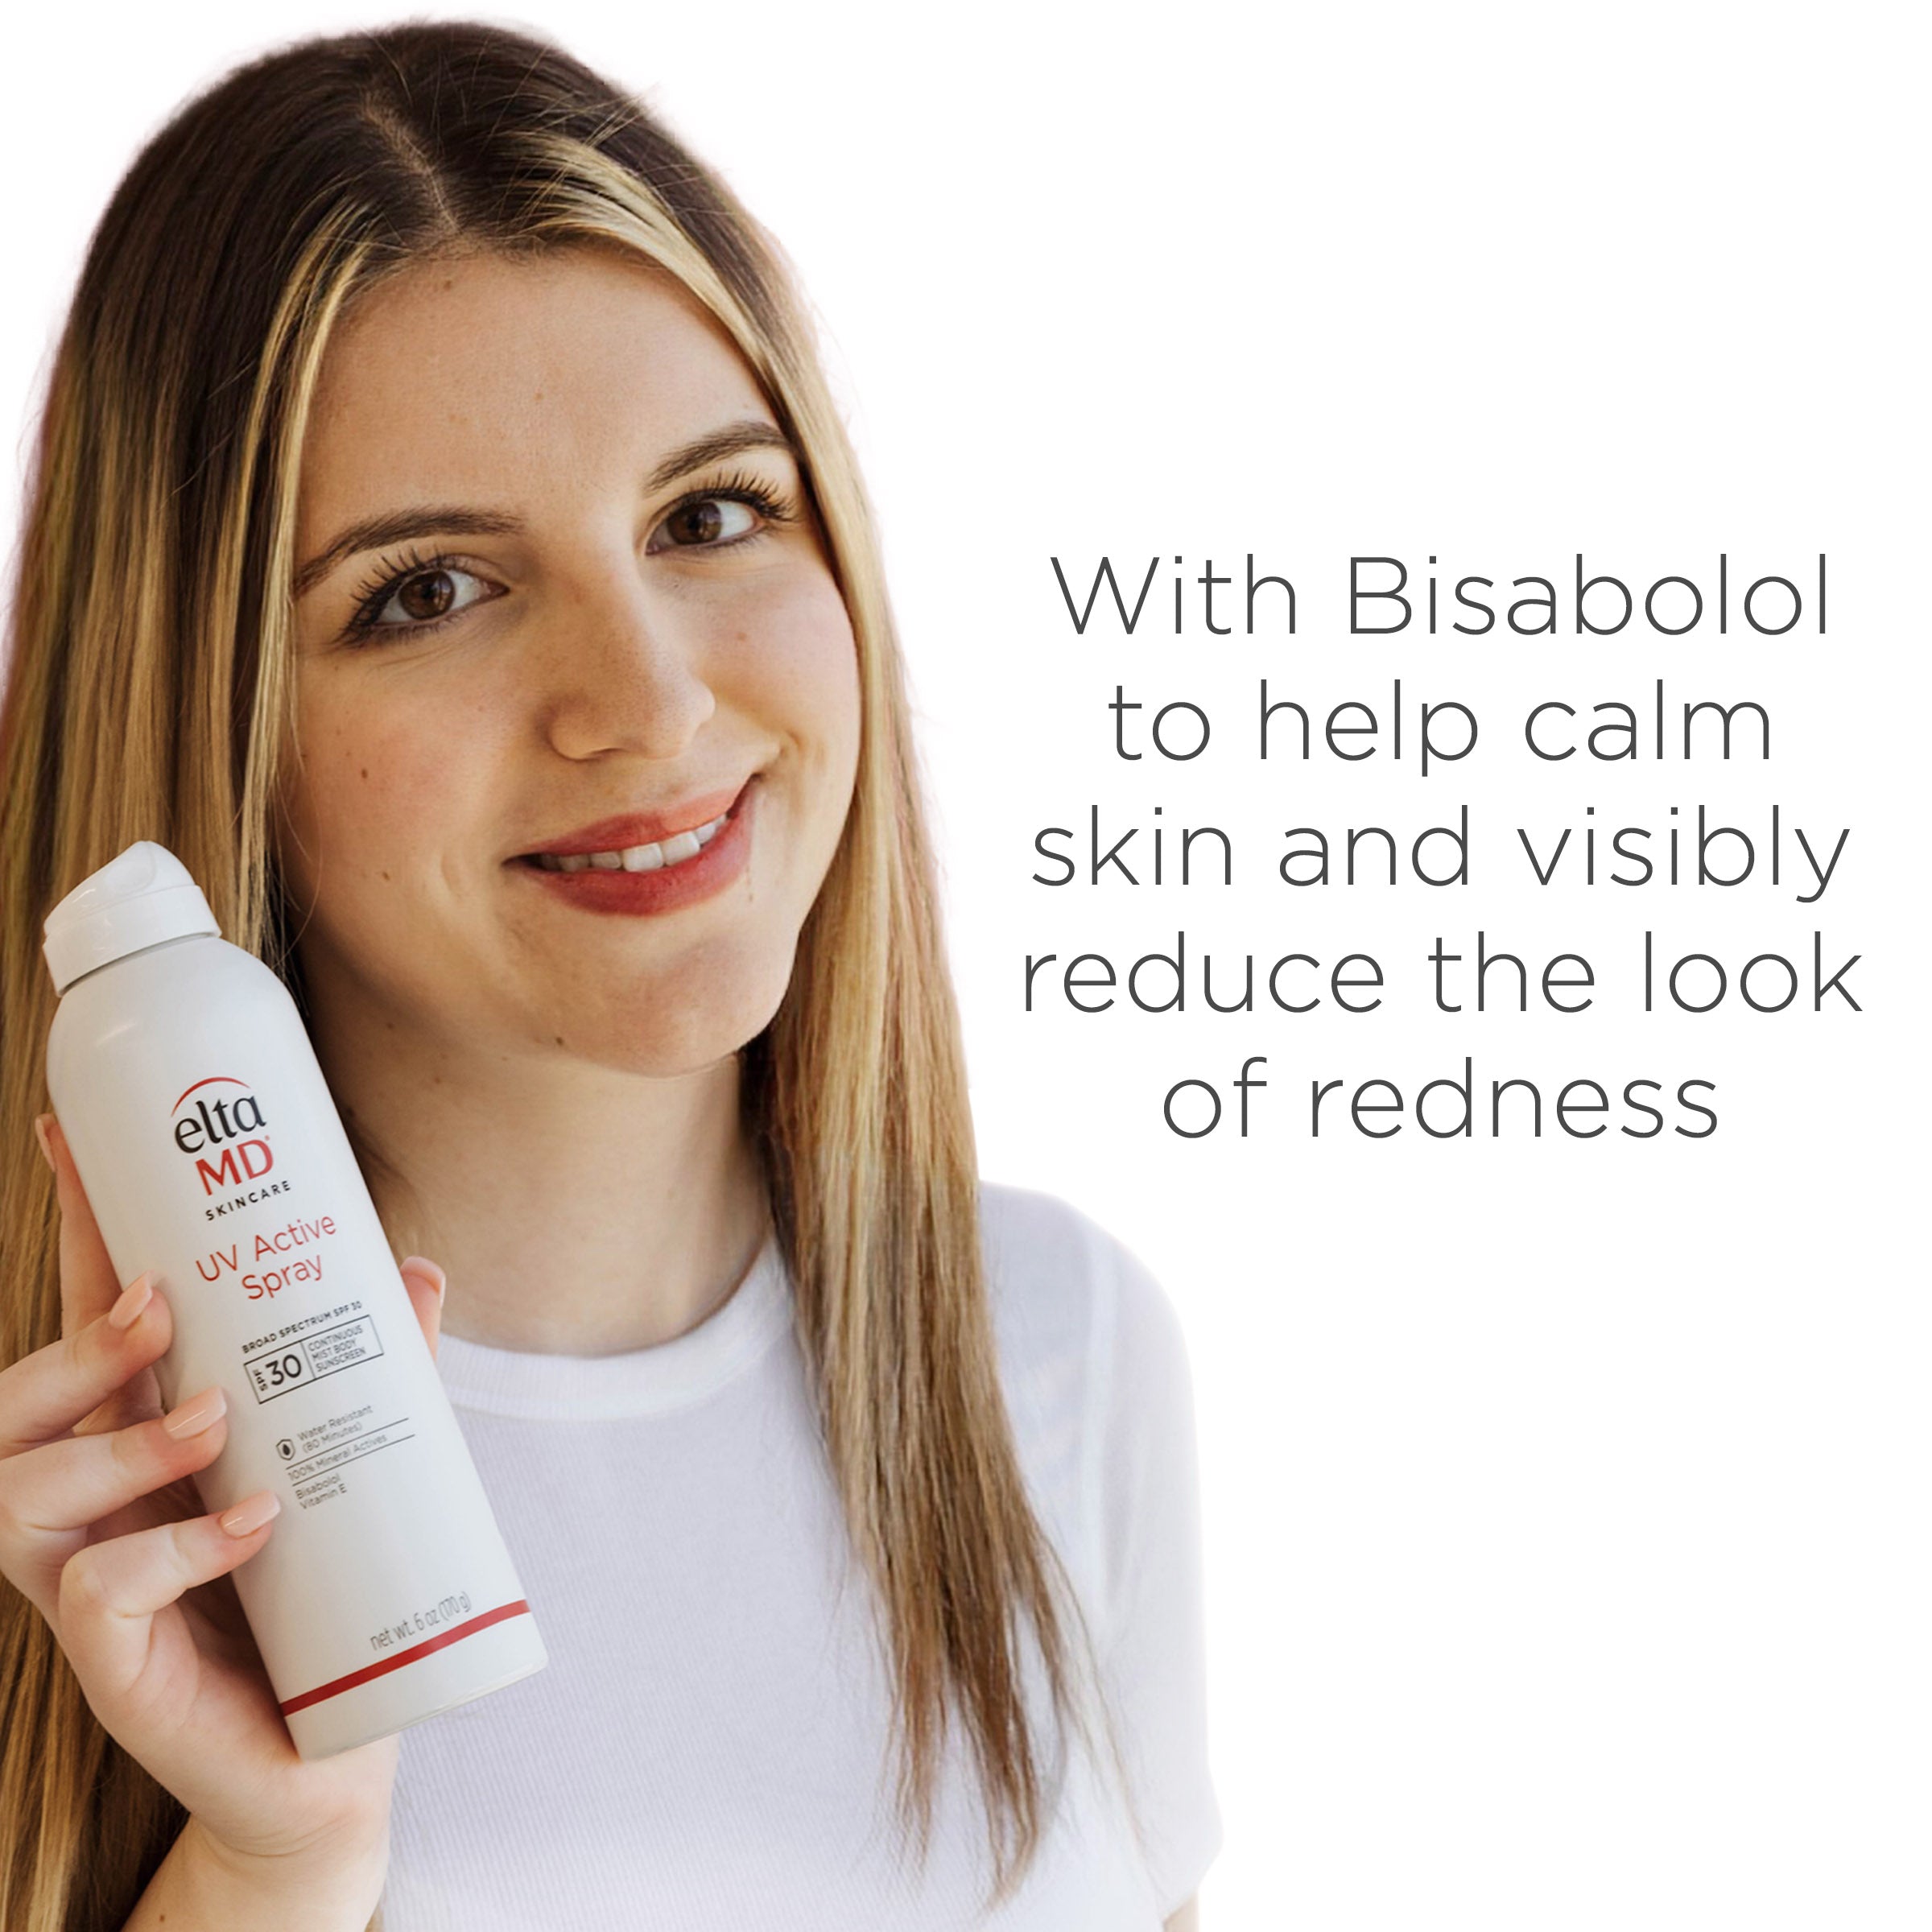 Bisabolol: helps calm the skin and visibly reduces the appearance of redness